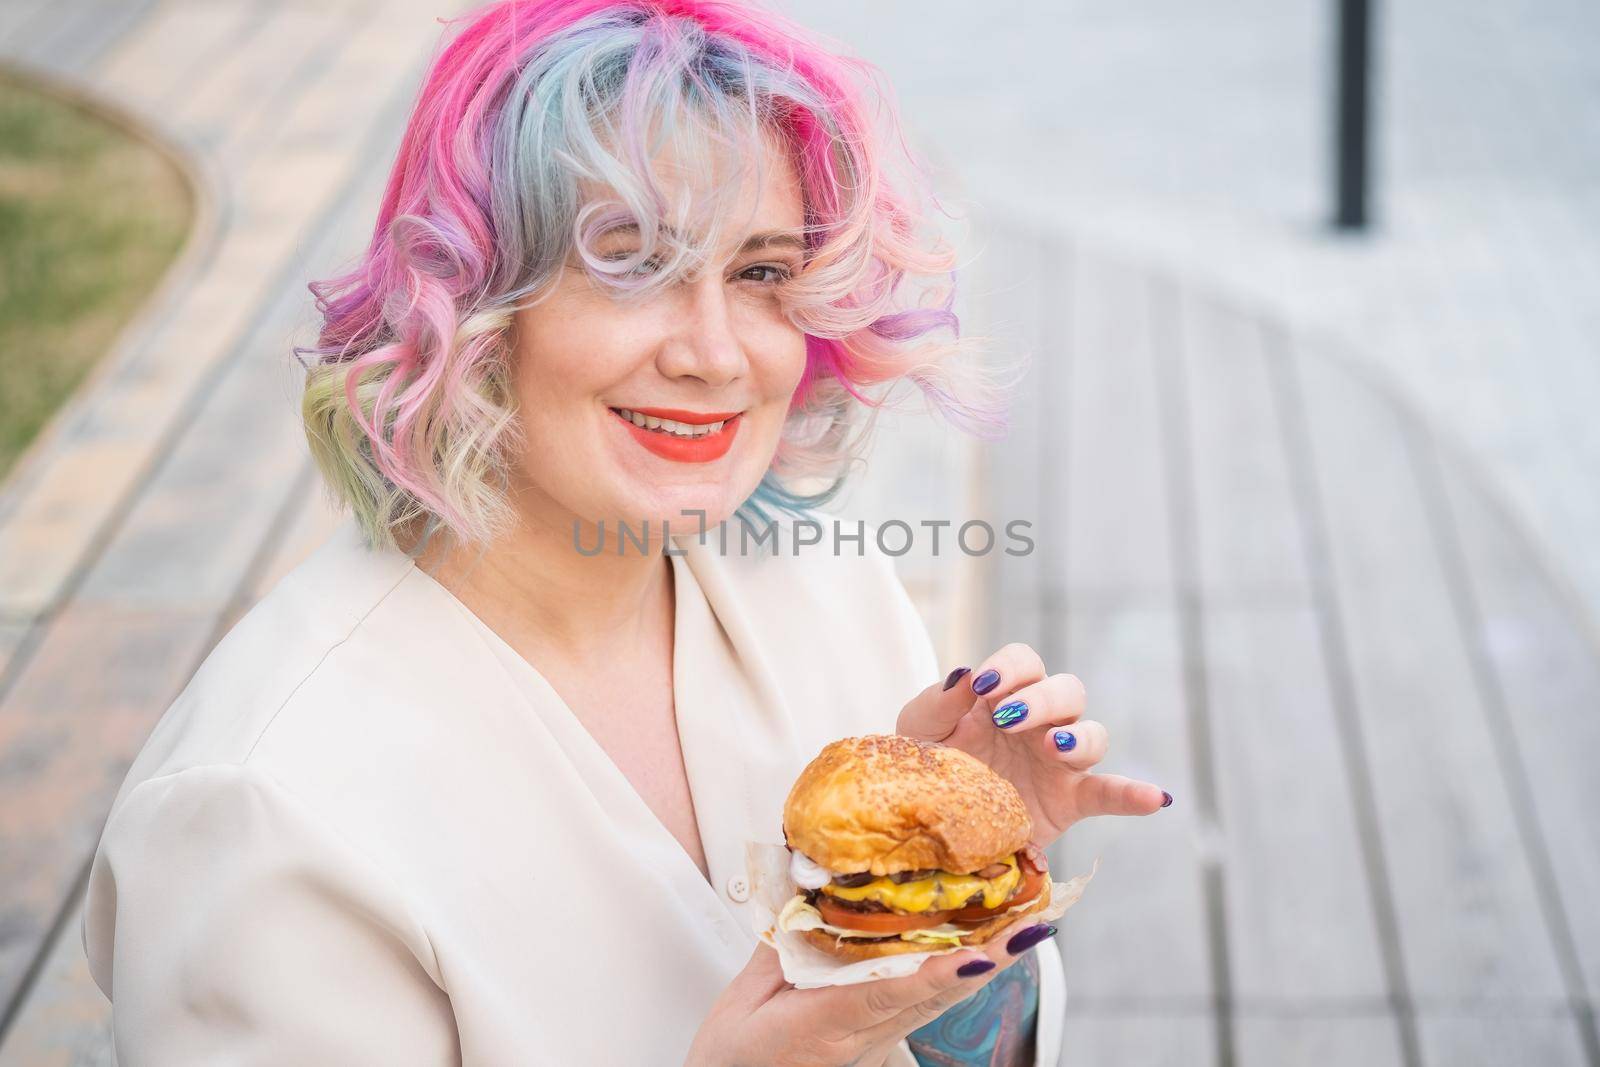 Caucasian woman with curly colored hair eating burger. Bad eating habits and love of fast food by mrwed54